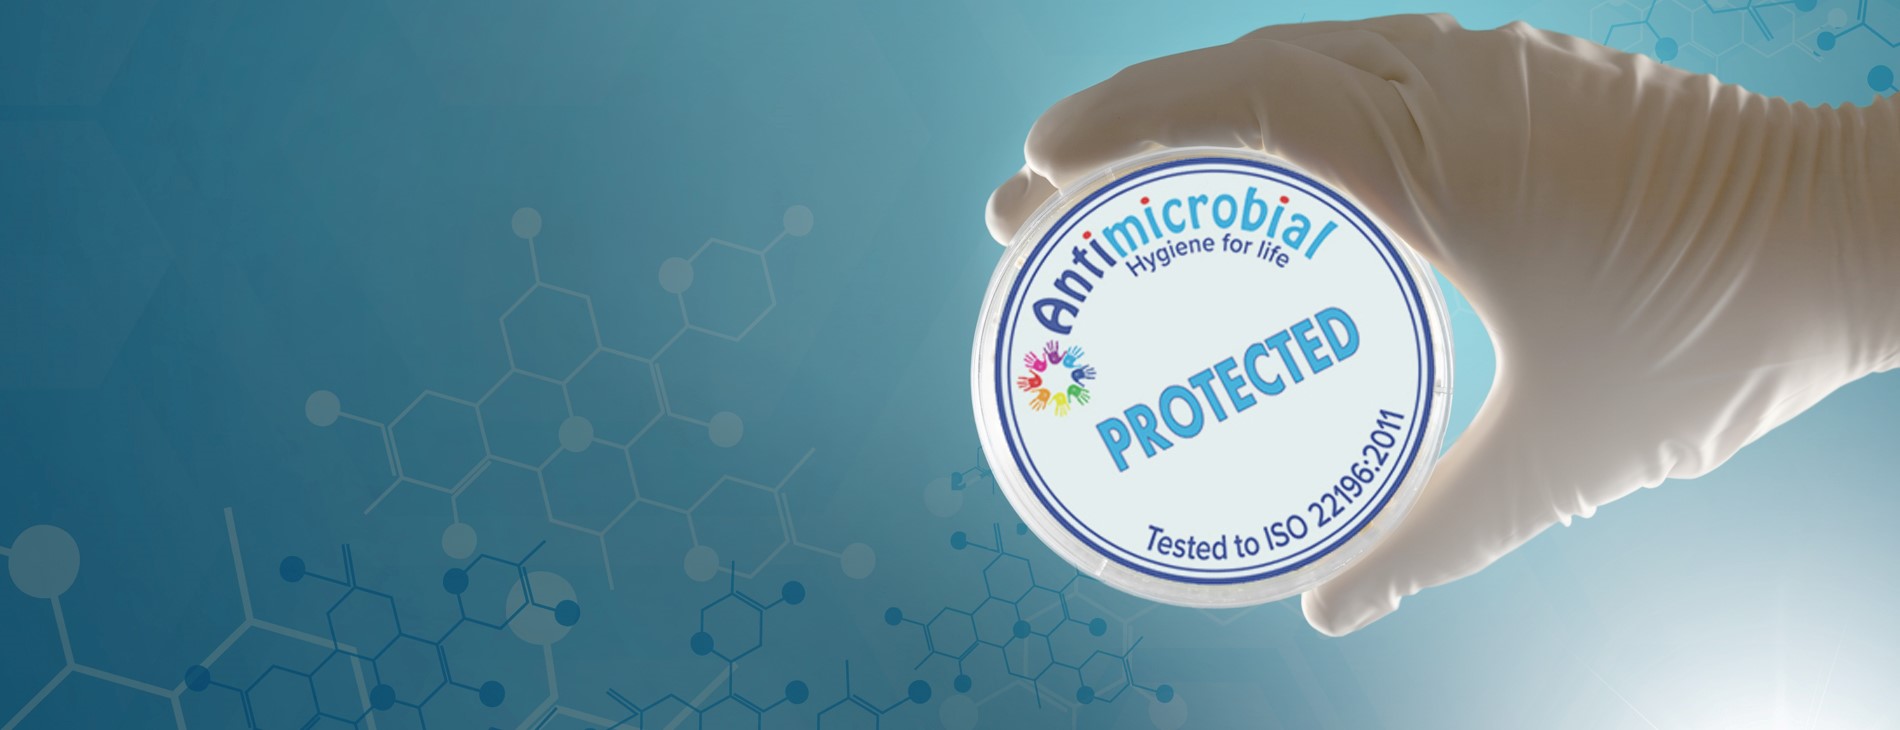 Antimicrobial products